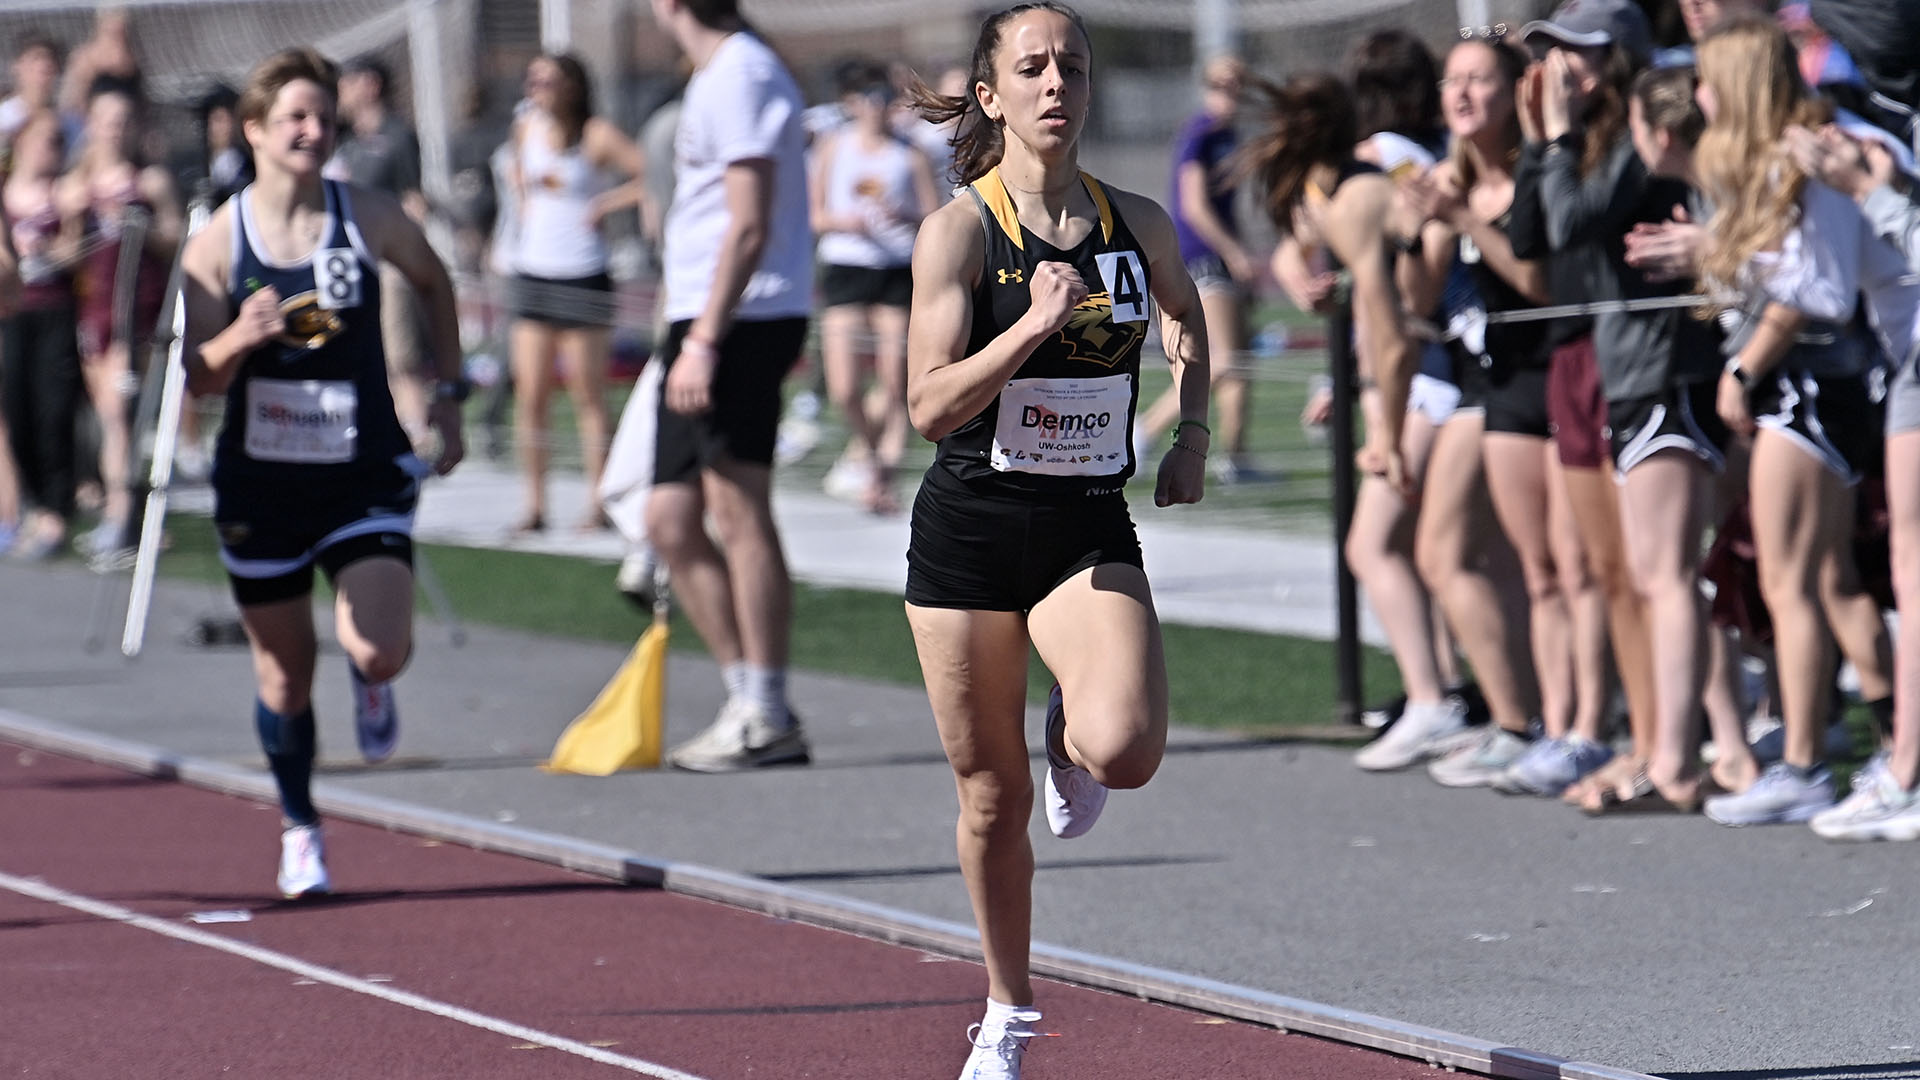 Alexandria Demco successfully defended her 800- and 1,500-meter run titles at the 2022 WIAC Outdoor Track & Field Championship.